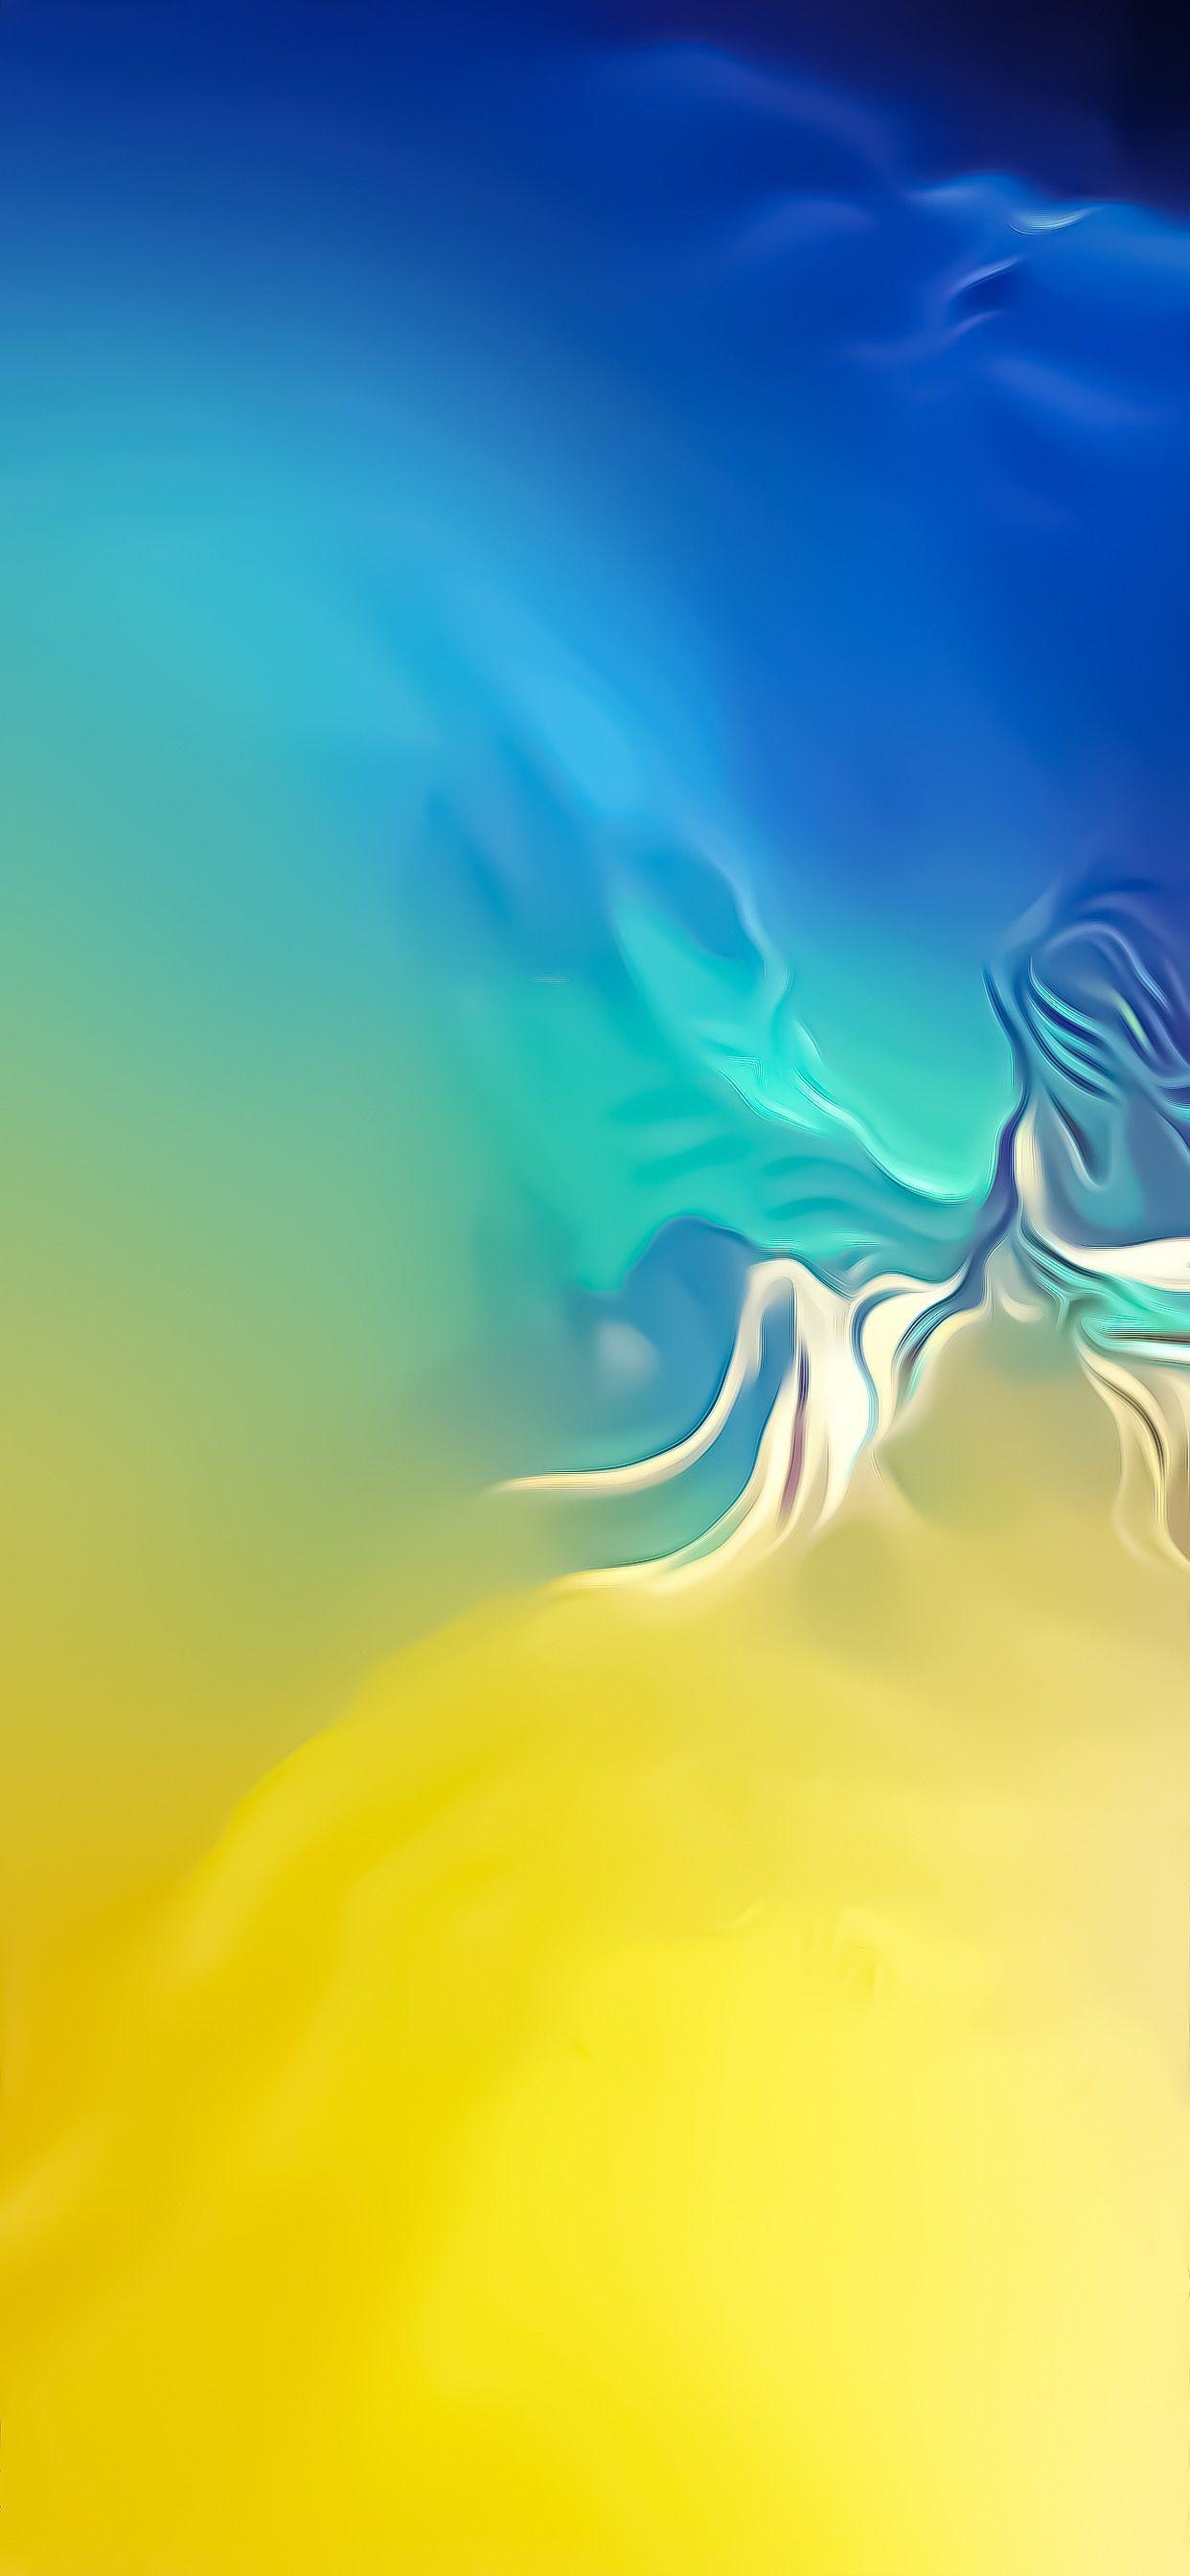 Samsung Galaxy S6 And S6 Edge Default Wallpapers Leak Before Release